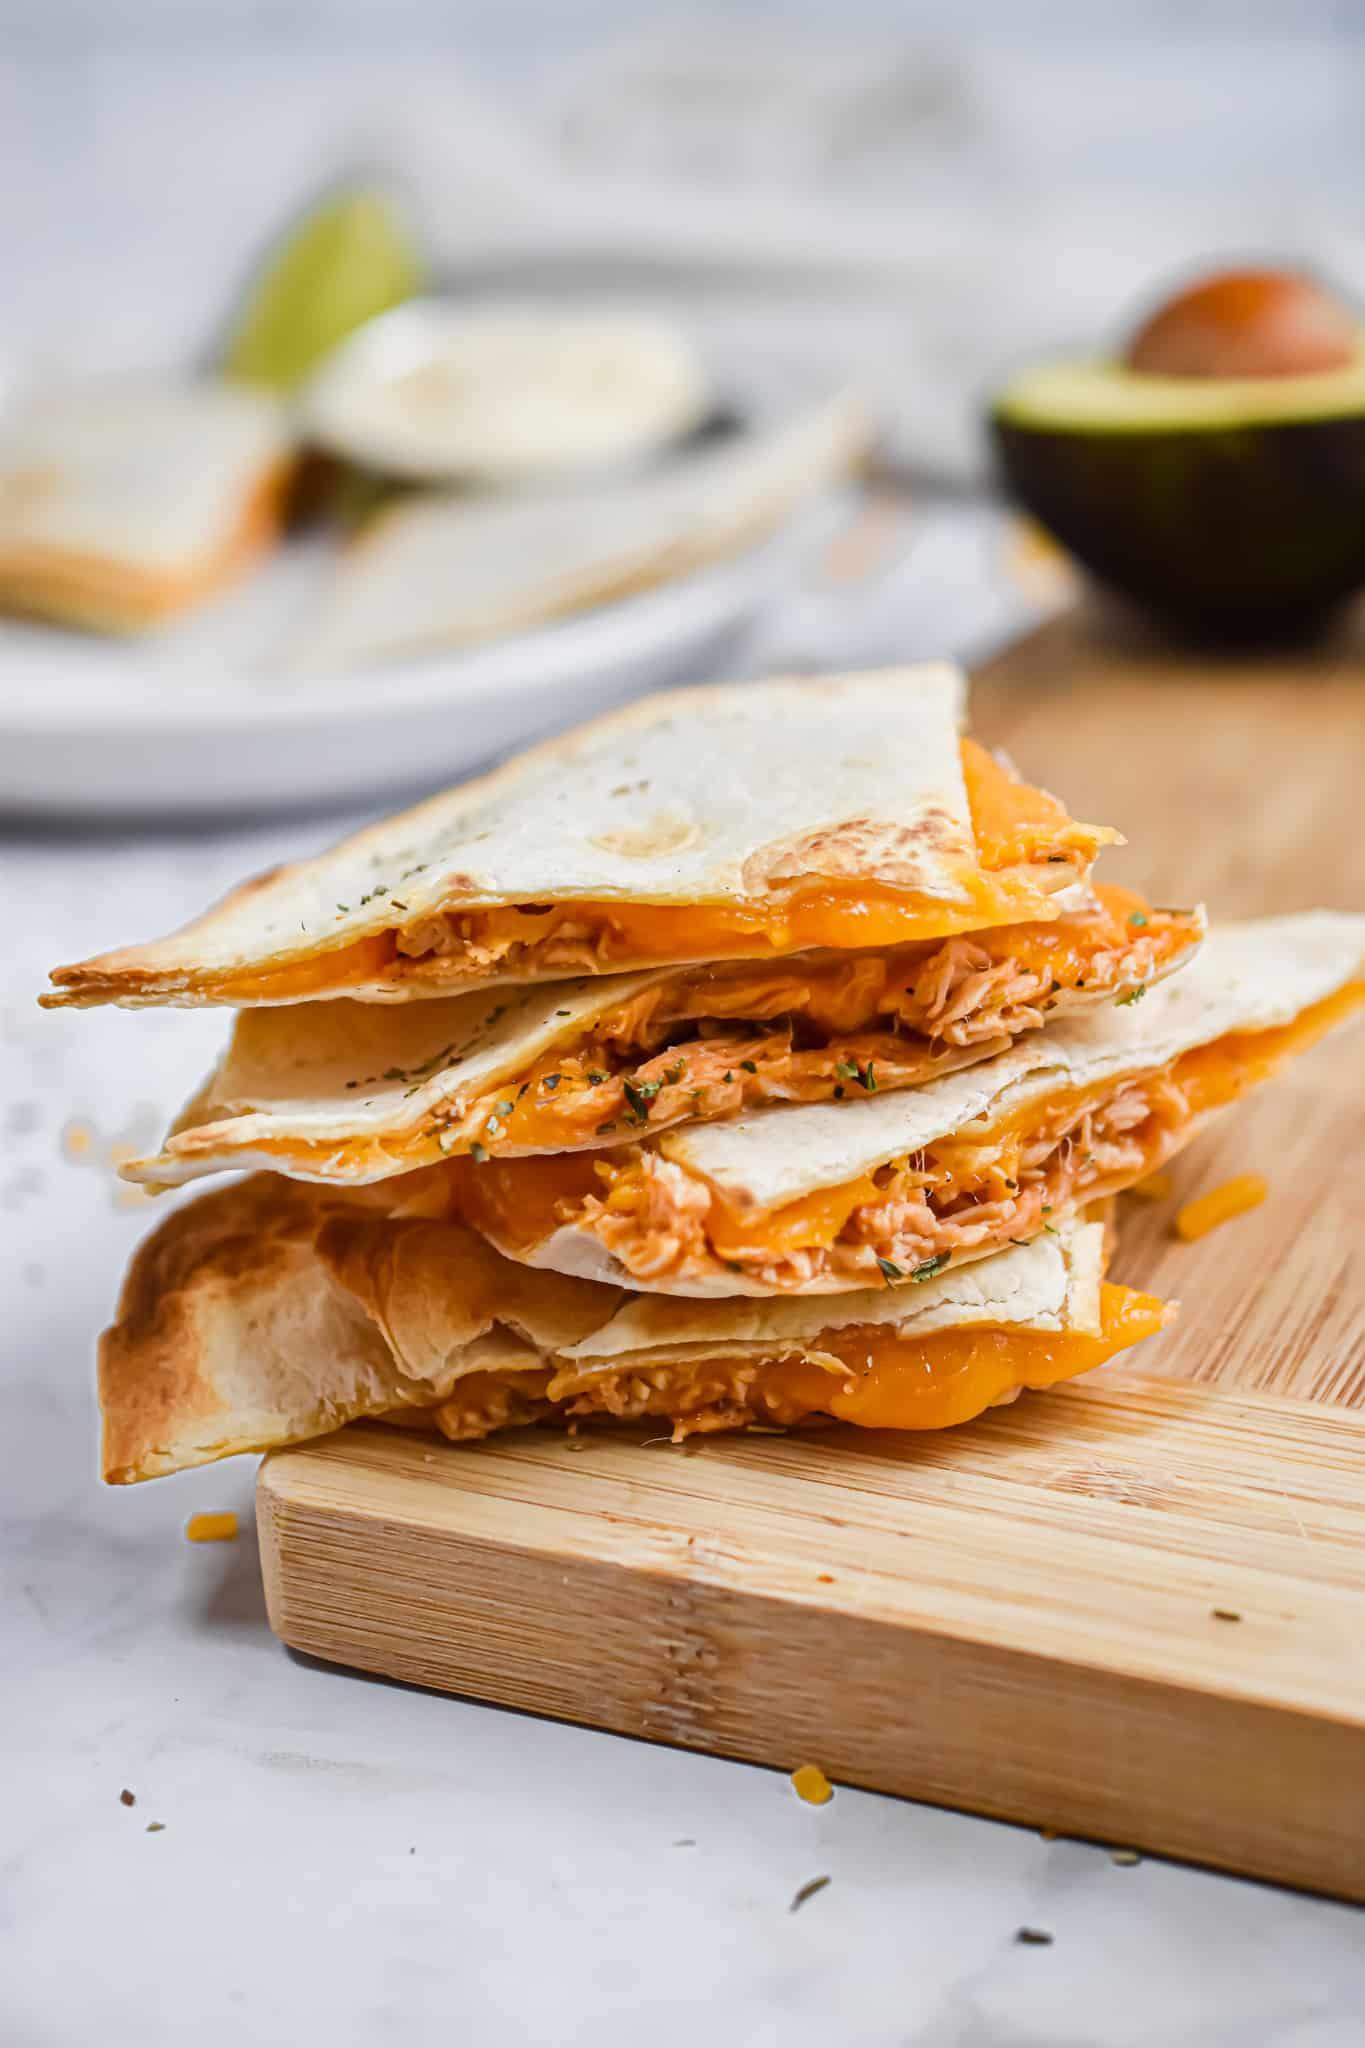 The buffalo chicken sheet pan quesadillas are stacked on top of a wooden cutting board.